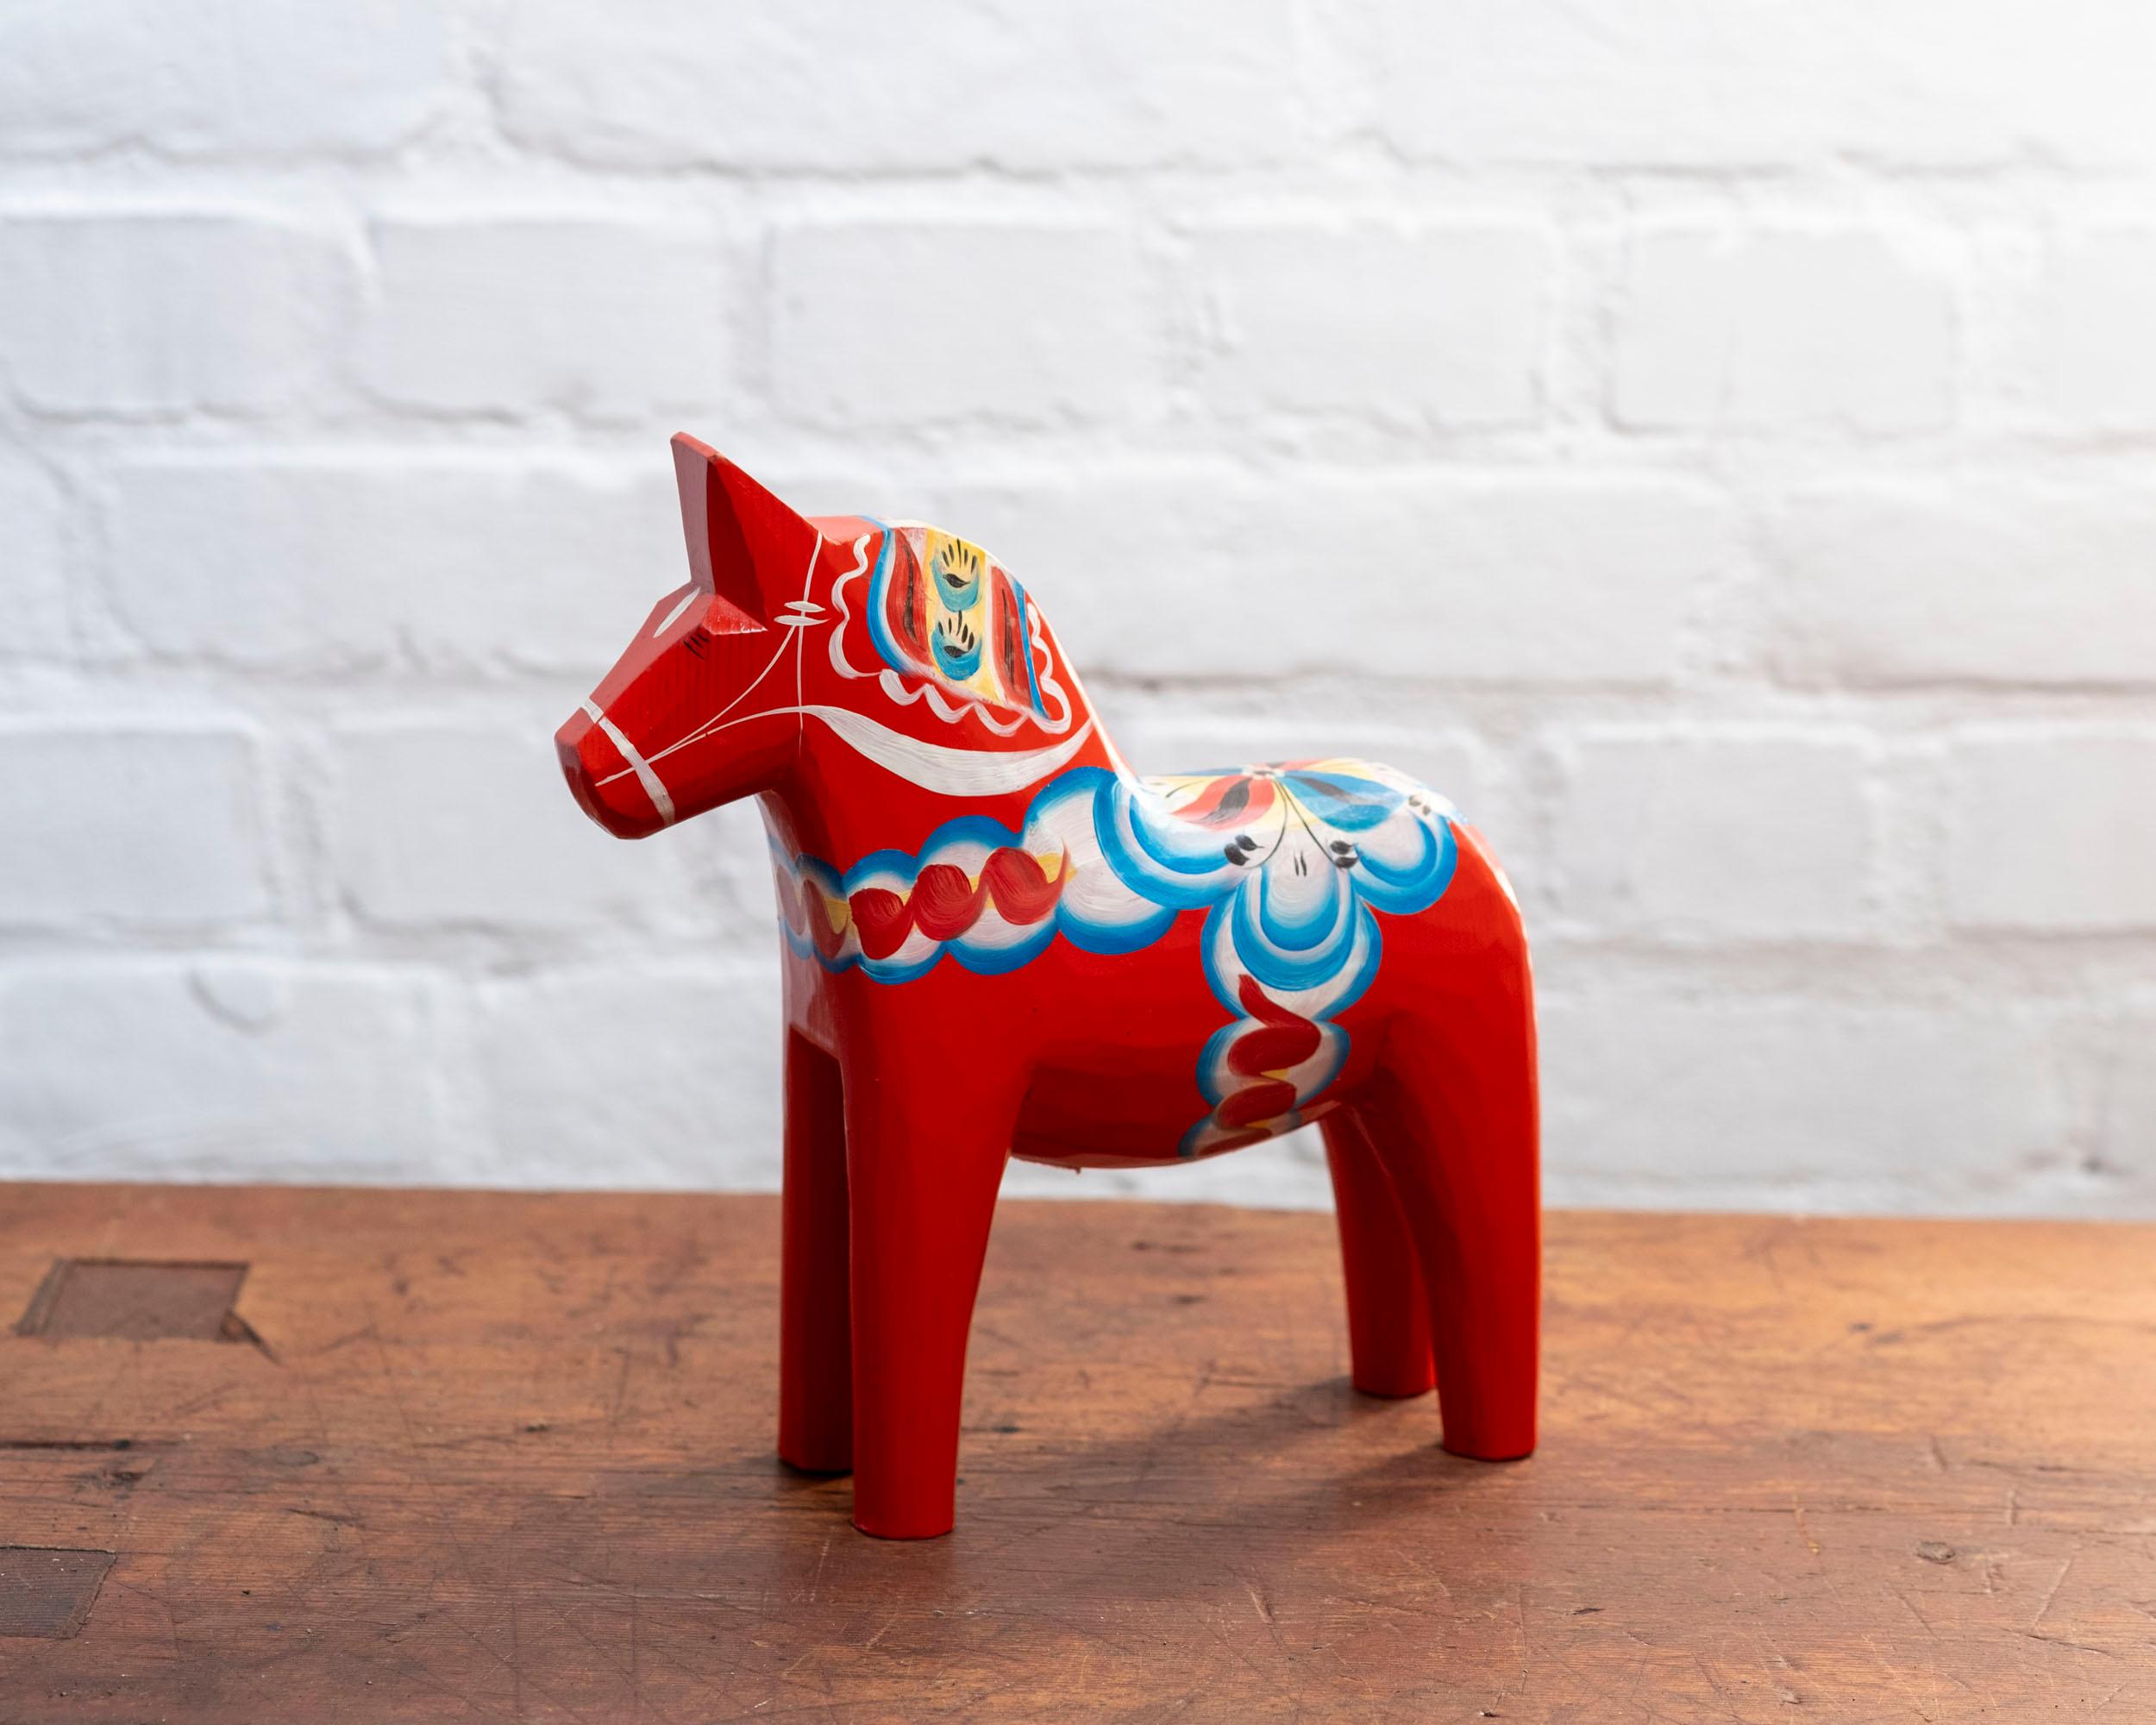 Vintage Swedish Dala Horse by Nils Olsson for Grannas A. Olssons Hemslöjd, circa 1990s. The horse is in good vintage condition and is hand-painted red with decorative accents.
This Dala Horse is the tallest model that's made from one solid piece of